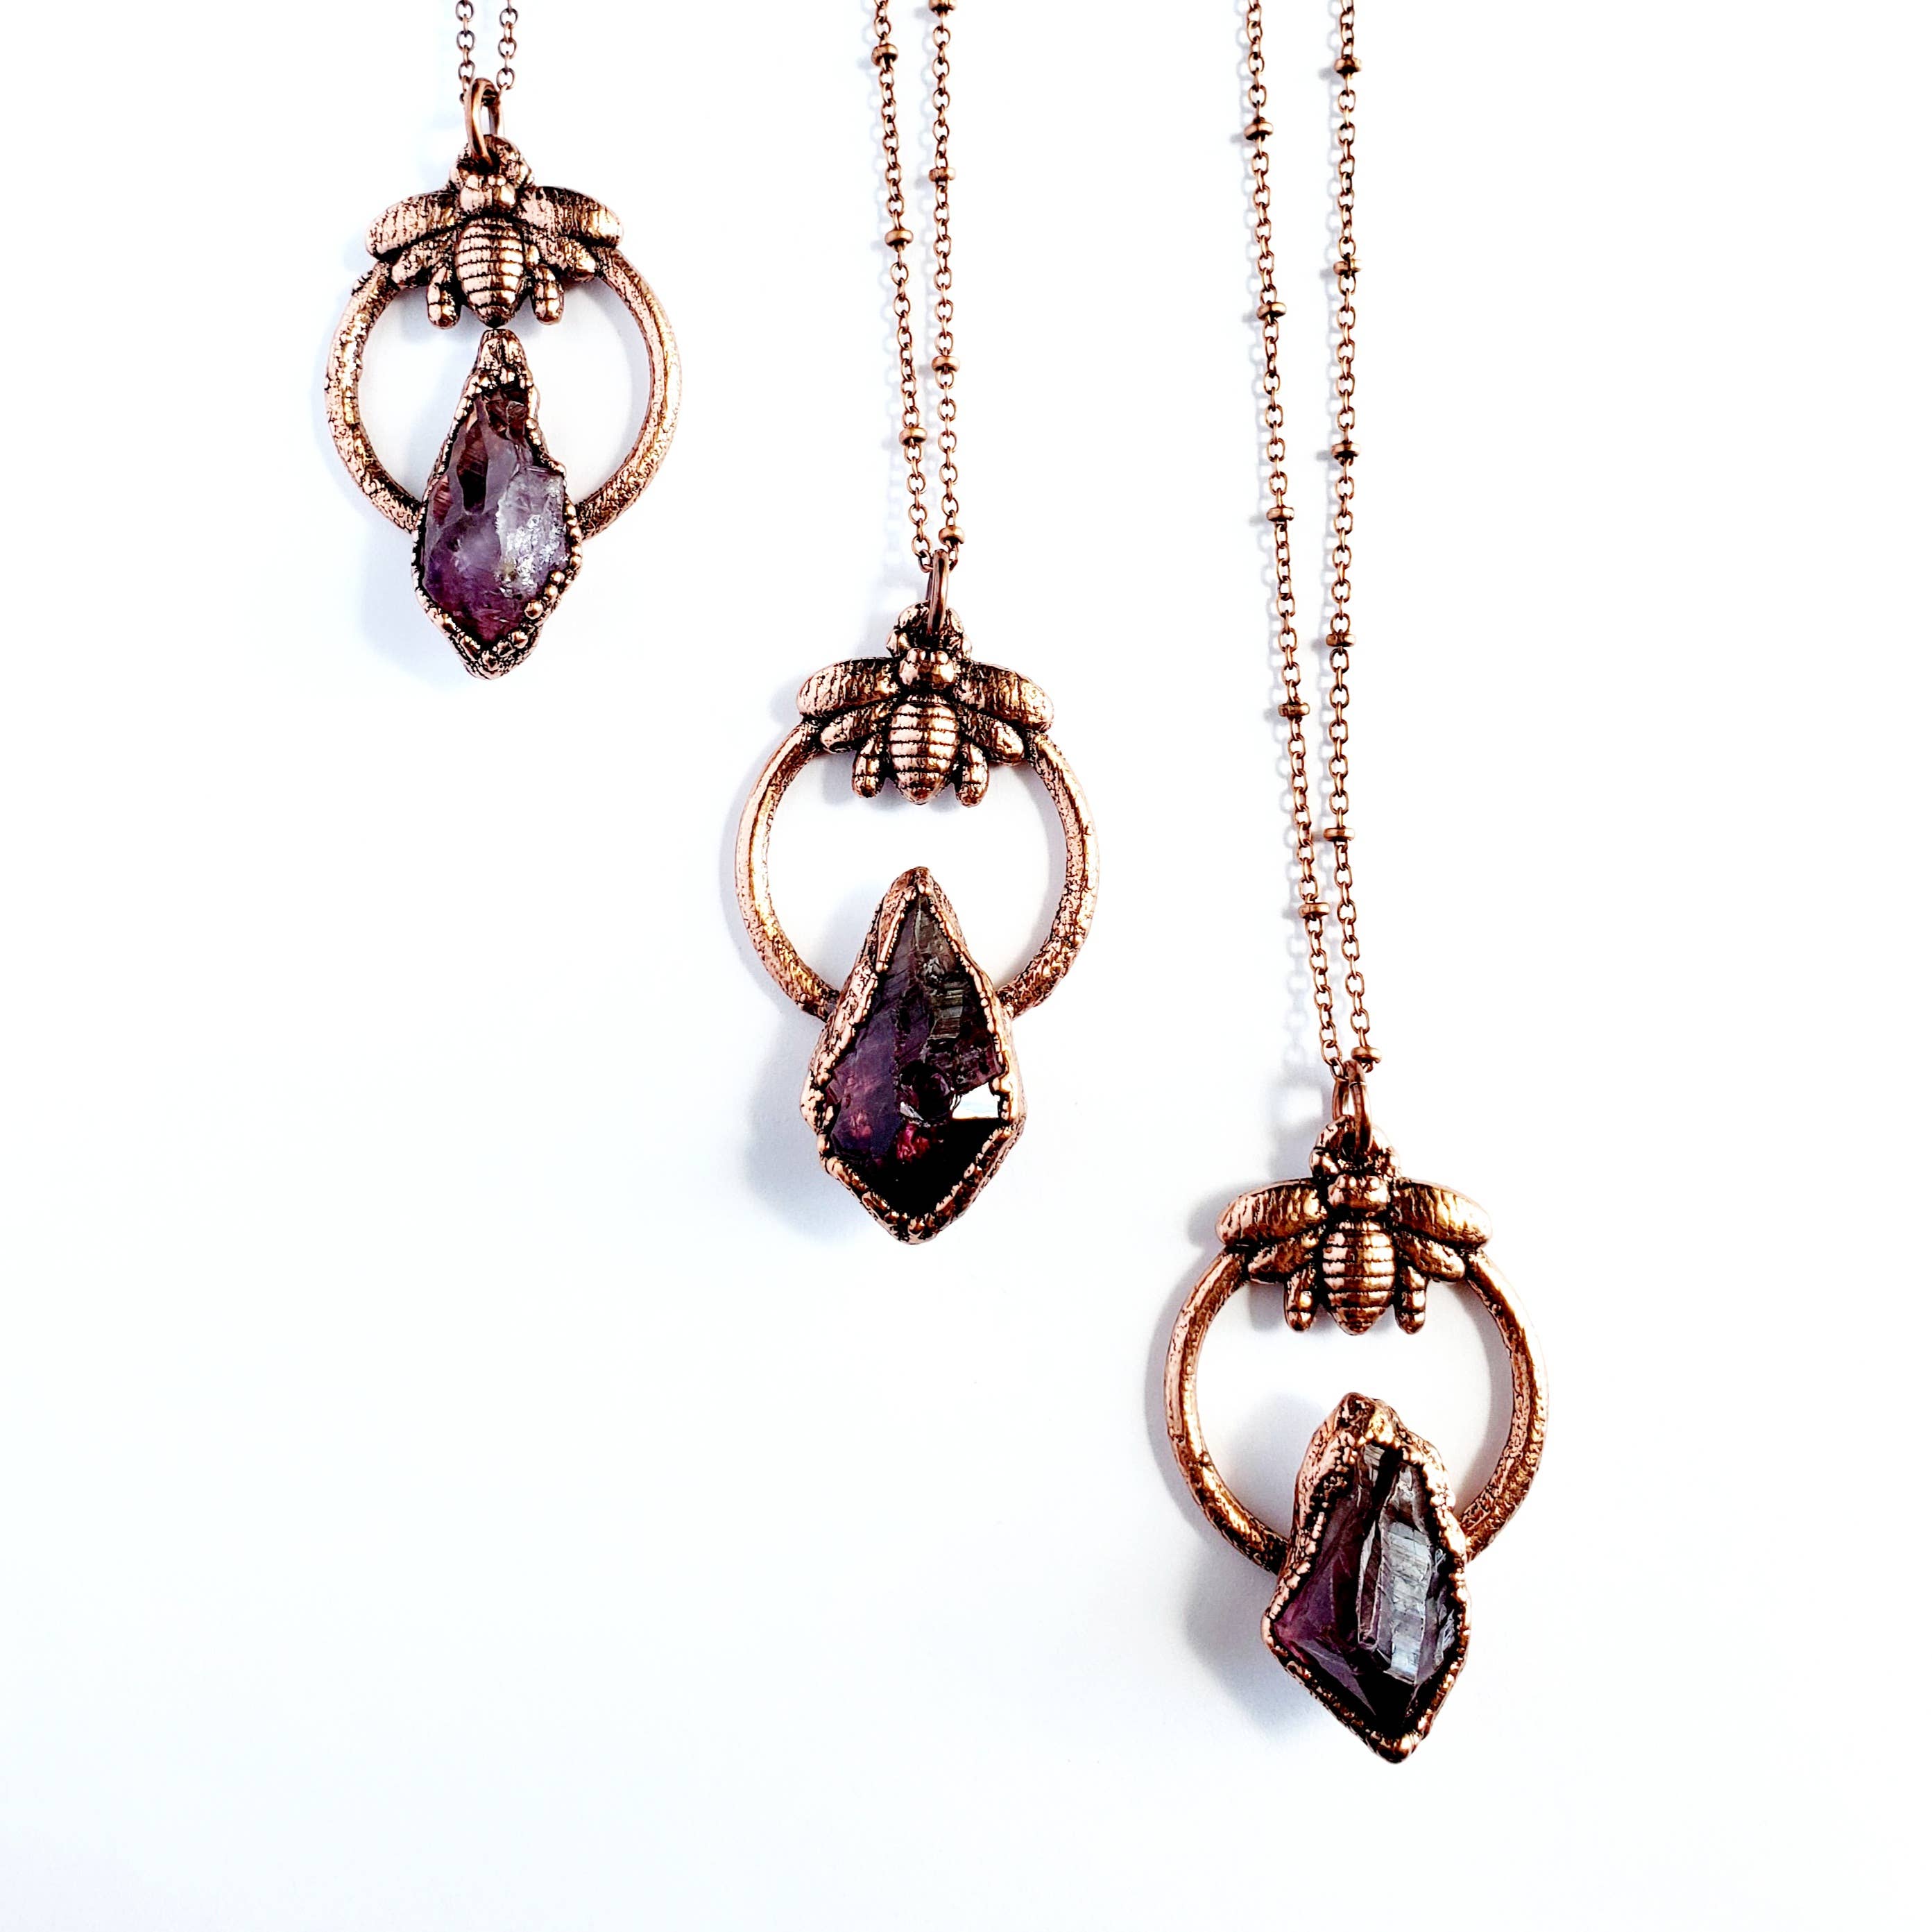 Amethyst Crystal Point & Bee Necklace - 18" Copper Chain